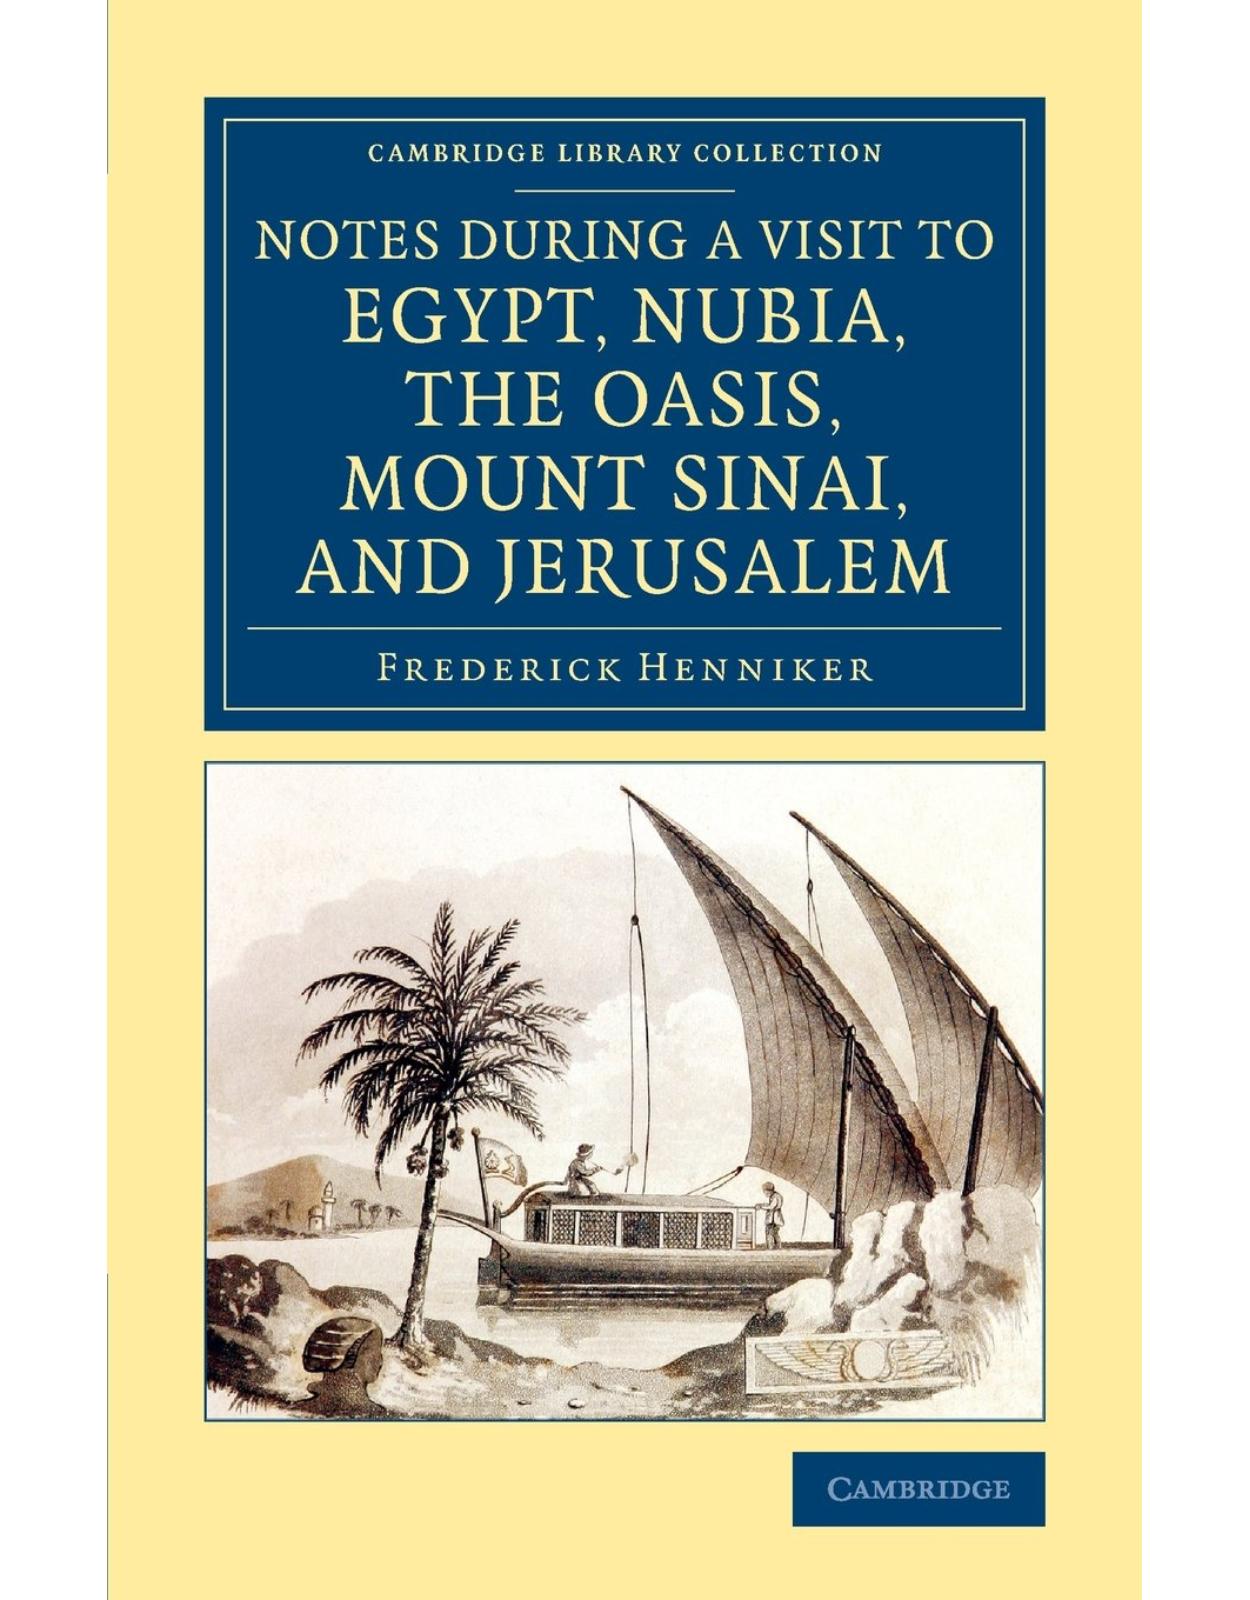 Notes during a Visit to Egypt, Nubia, the Oasis, Mount Sinai, and Jerusalem (Cambridge Library Collection - Archaeology) 